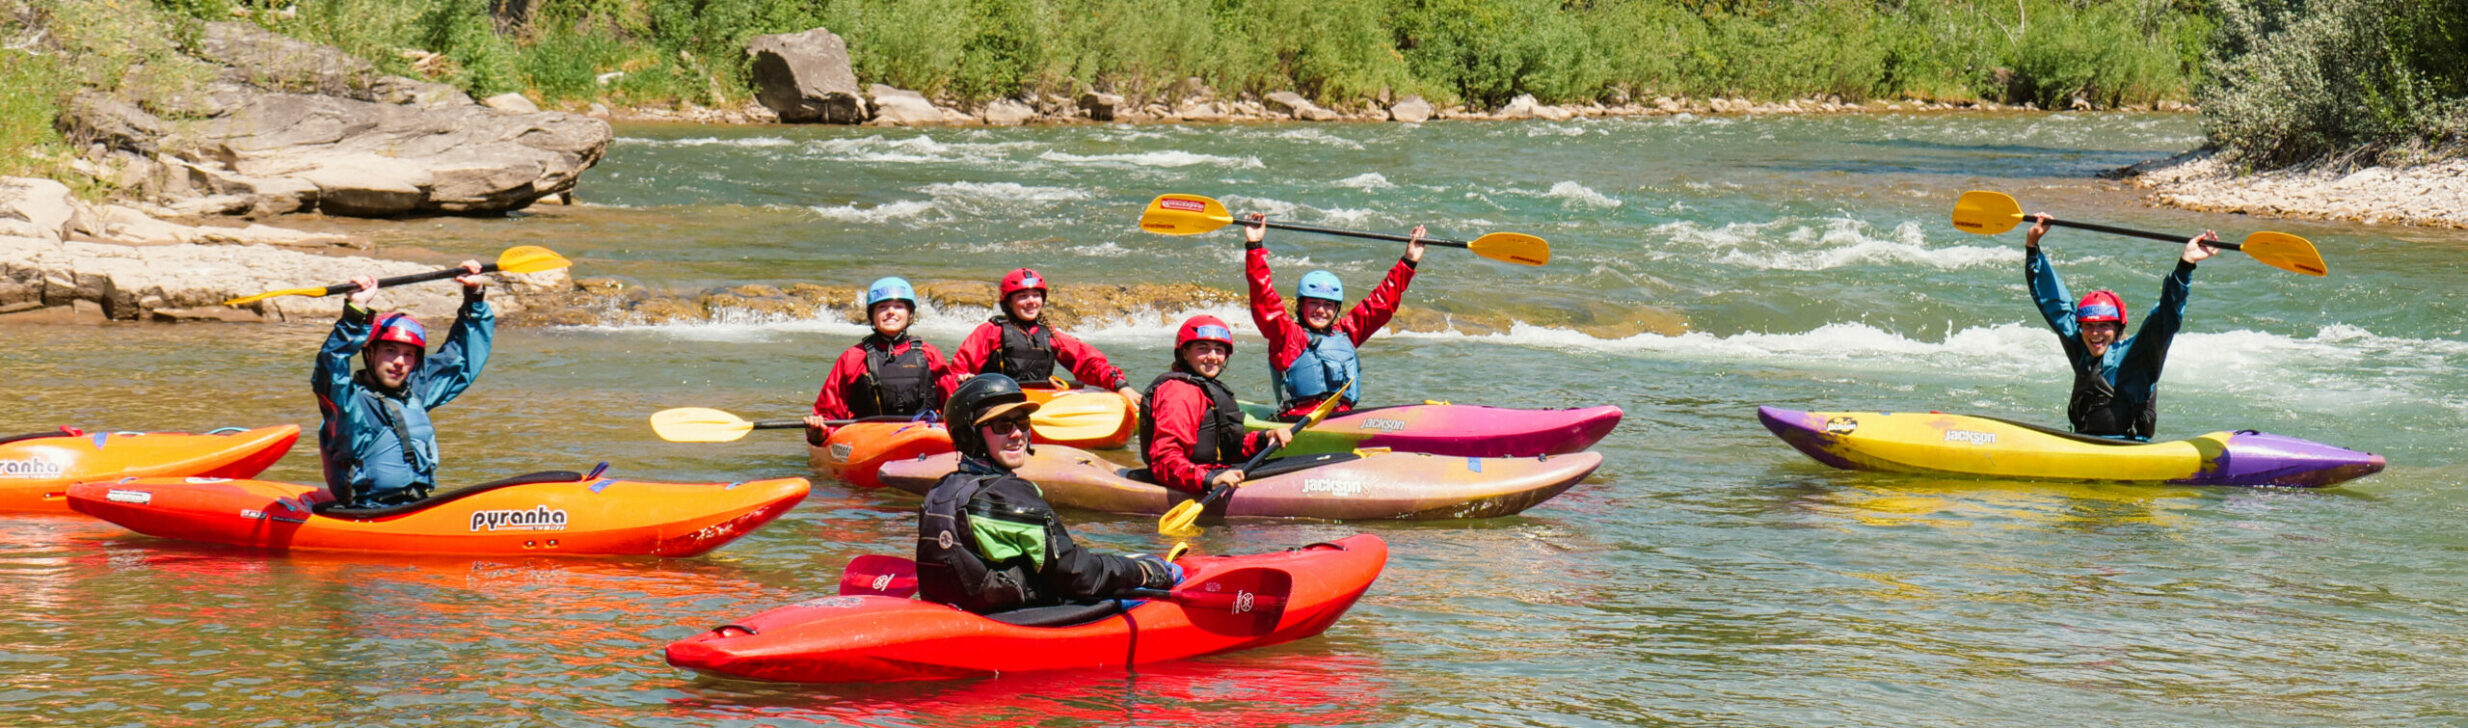 students on a river in whitewater kayaks holding the paddles above their heads